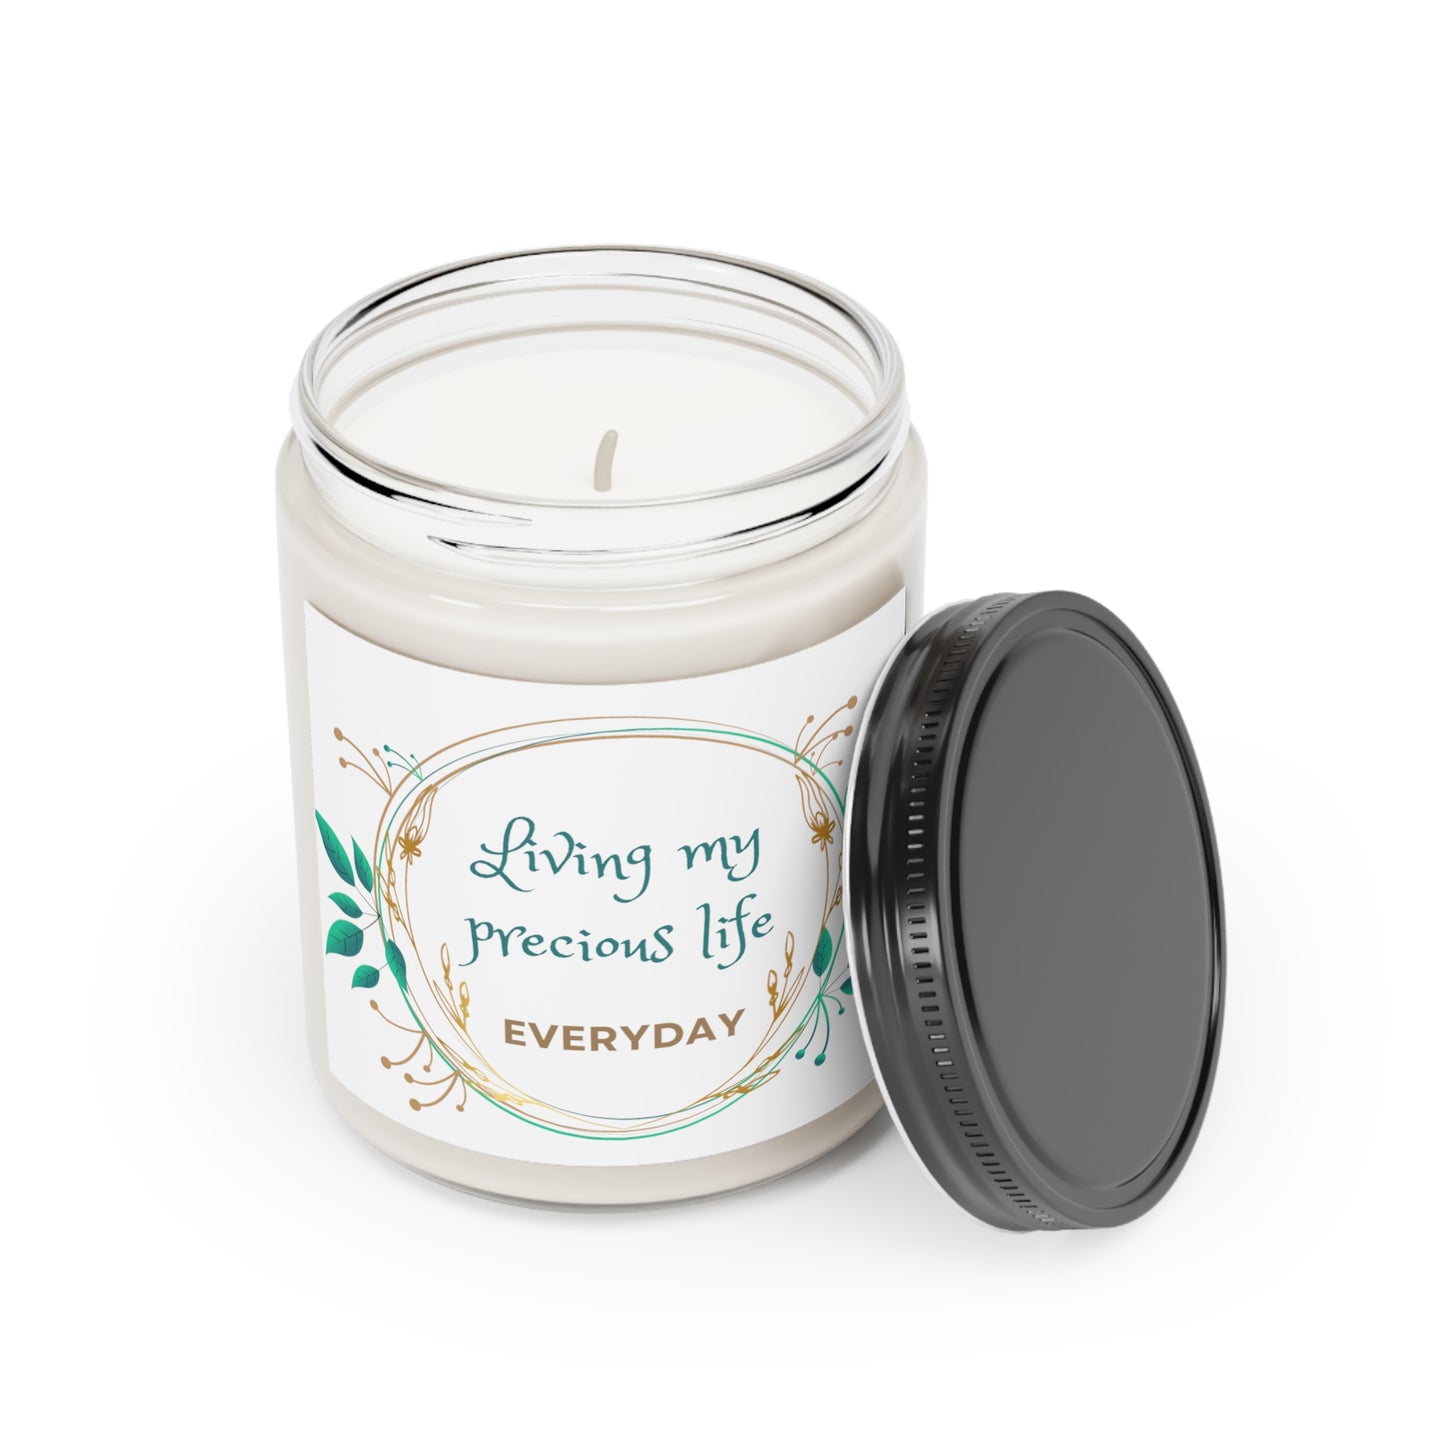 Scented Candle, 9oz - Living my PRECIOUS LIFE - Made from vegan soy coconut wax, hand-poured | 2 ambrosial fragrances available, Cinnamon Stick and Vanilla.